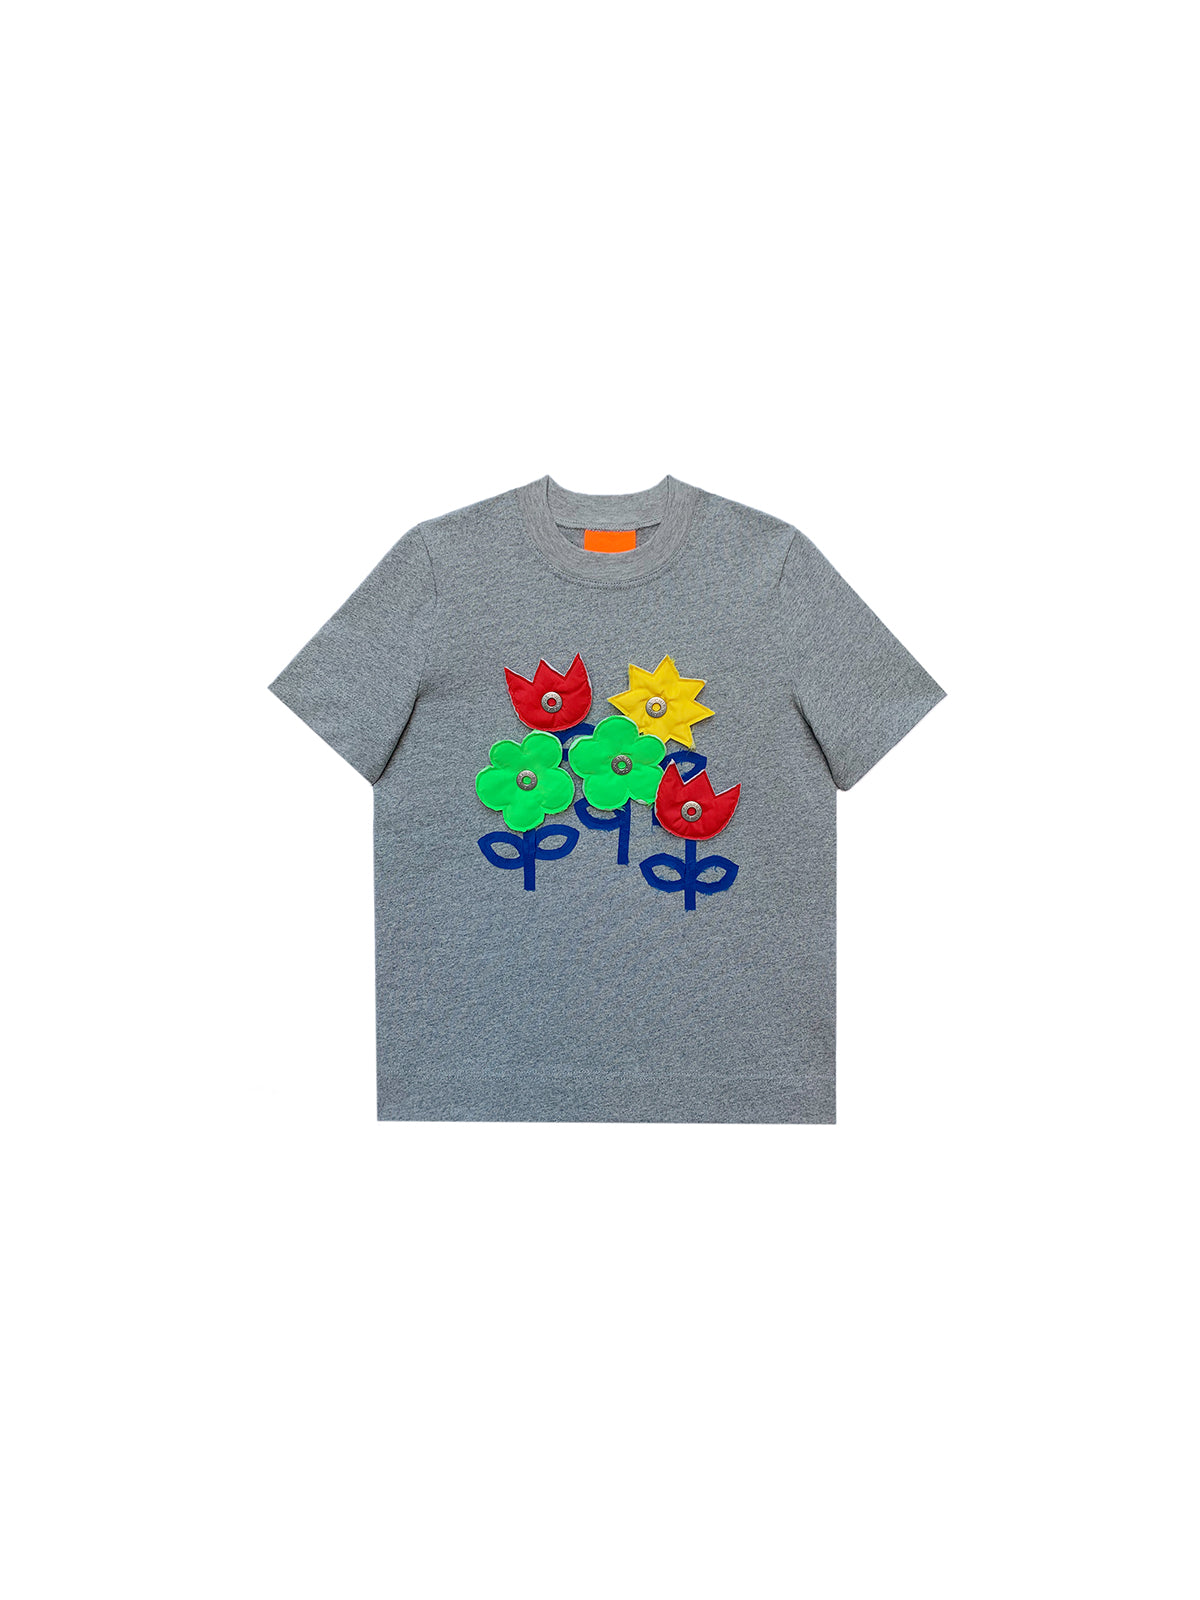 [ HAPPY MOTHER'S DAY ] ALL OF FLOWERS WERE BLOOMING T-SHIRT